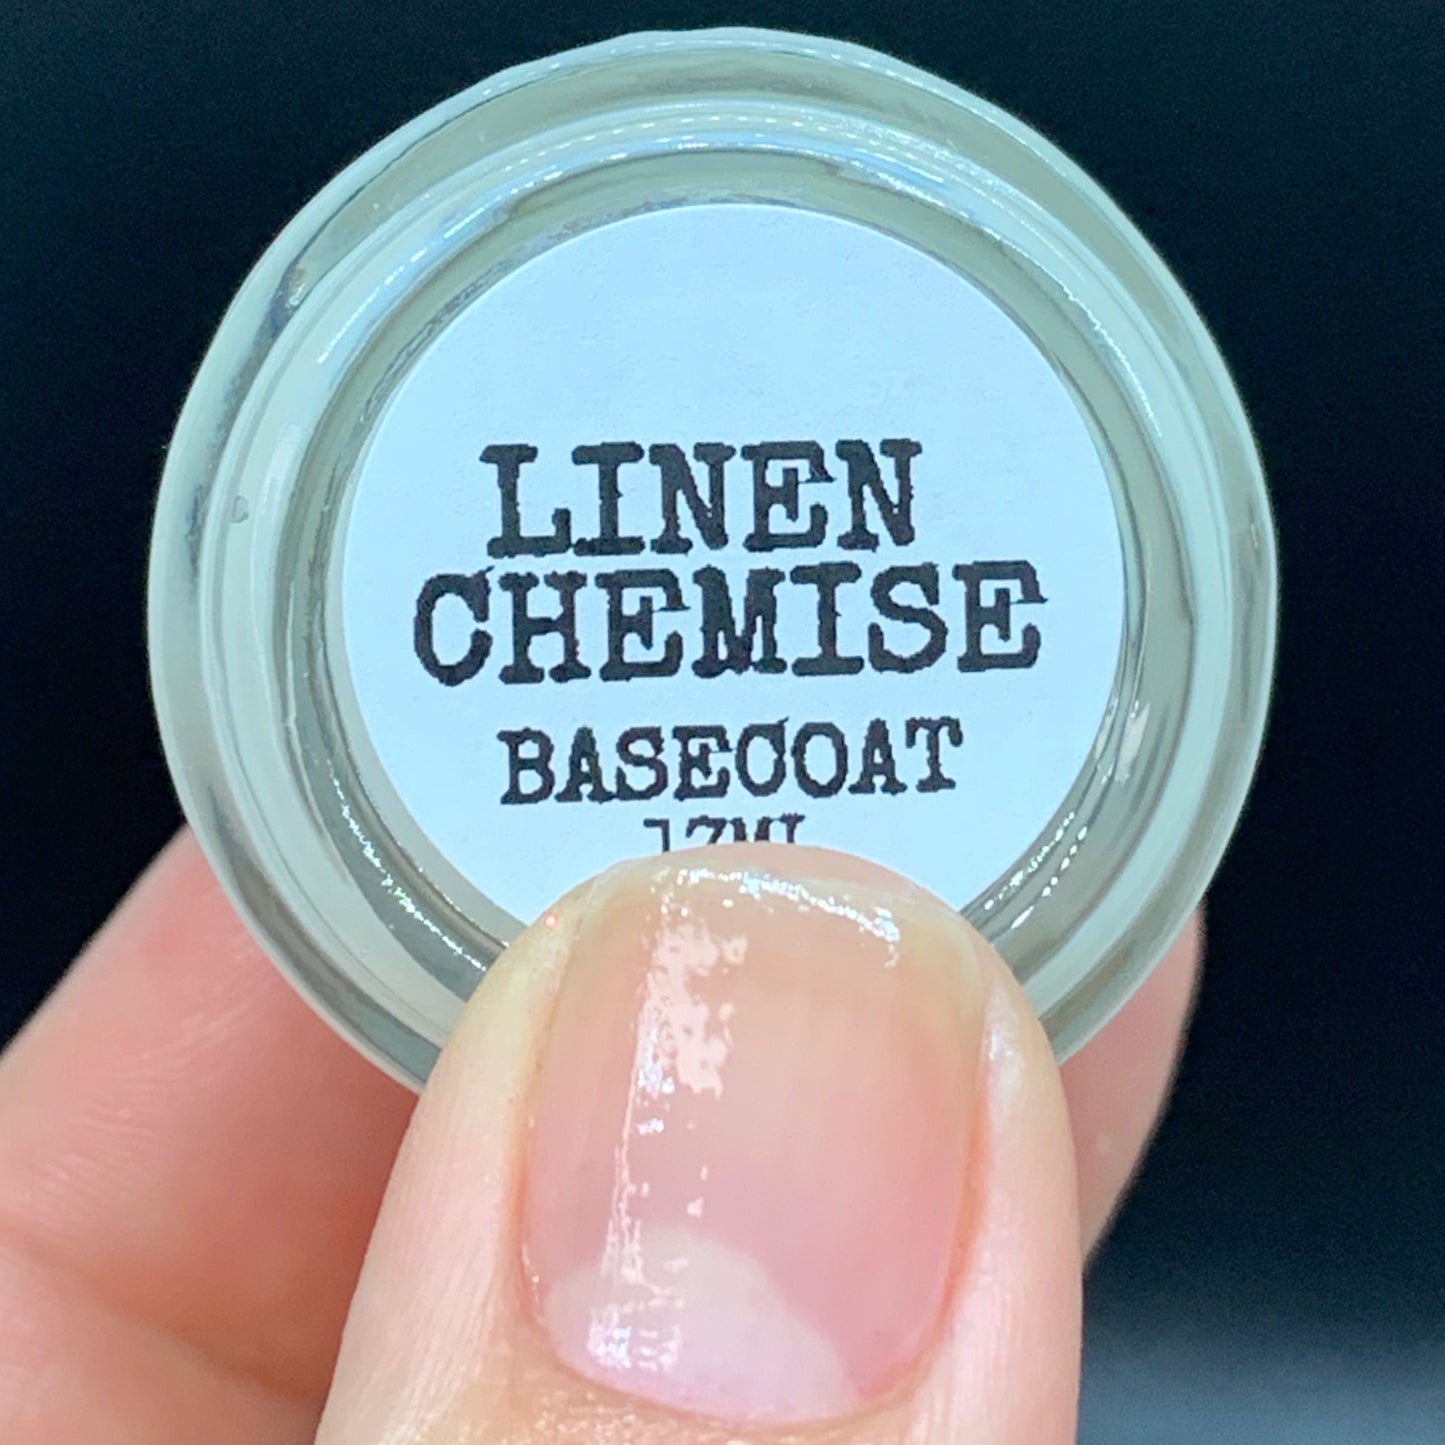 Our Linen Chemise base coat is sticky, light ridge filling, with a light semi satin coverage. It is a great neutral starting point to any mani to protect your natural nails from staining and keep your mani lasting longer. 